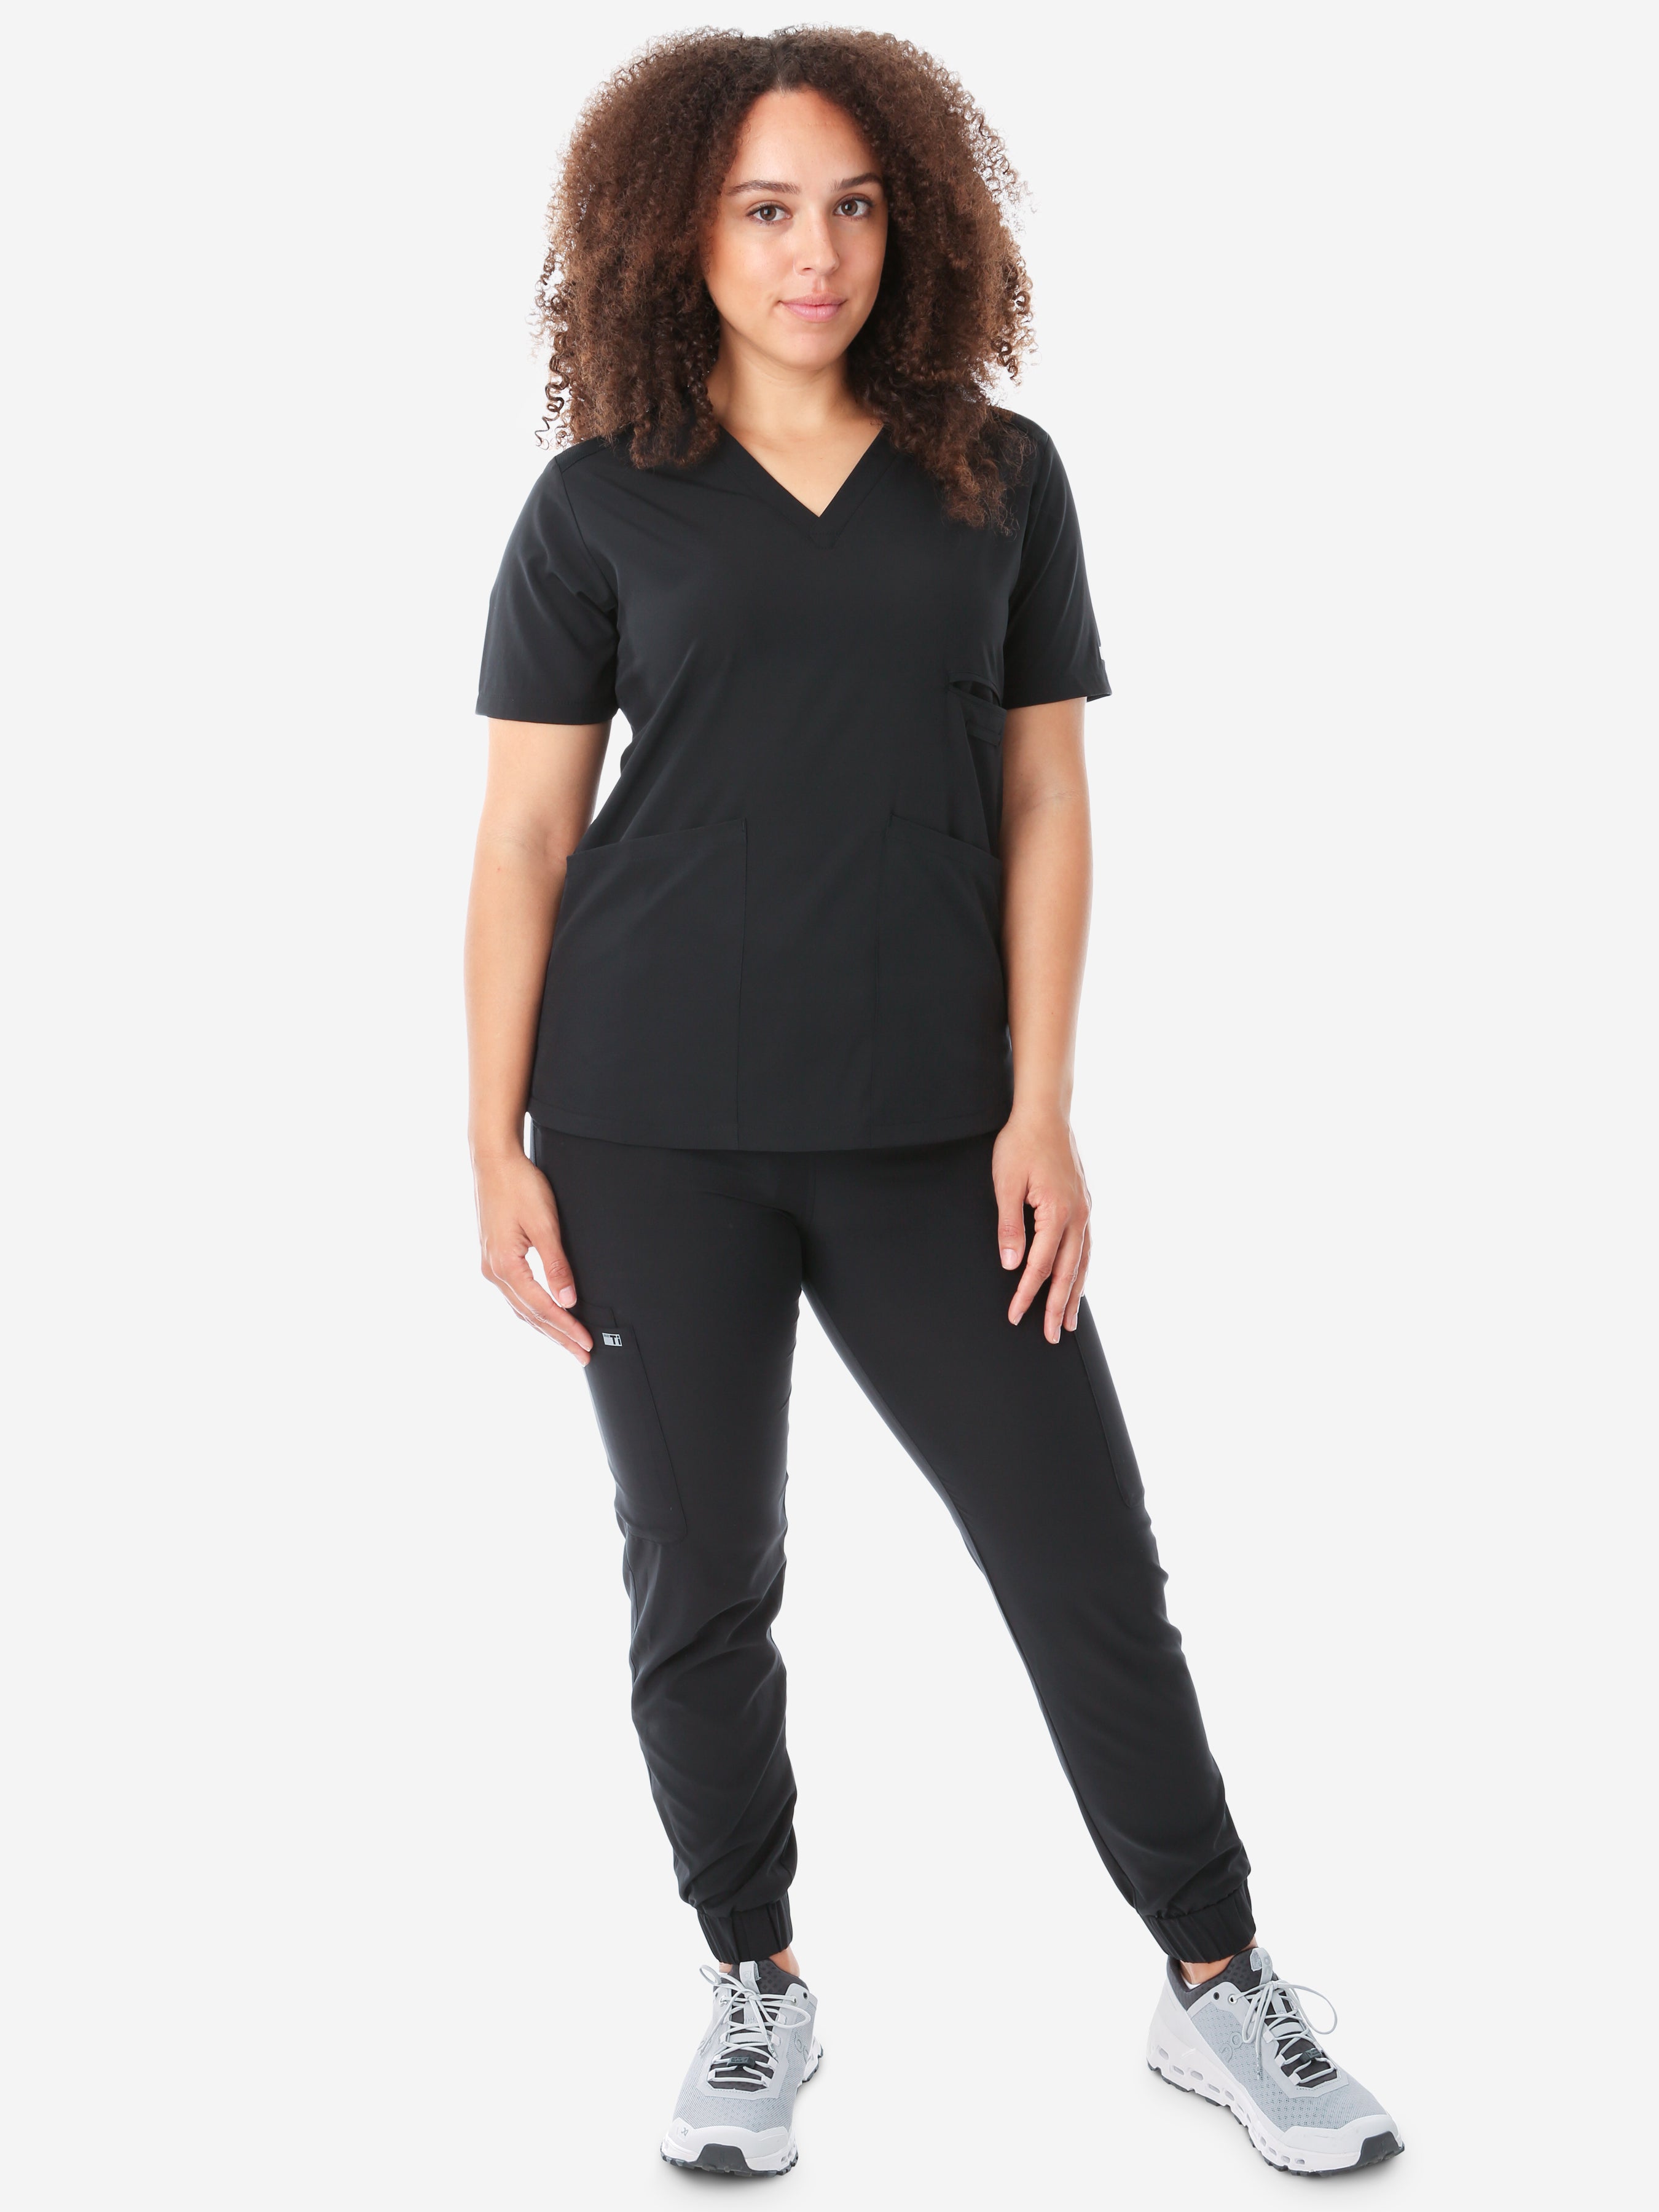 Women's Four-Pocket Scrub Top Real Black Top Full Body Front View with Joggers